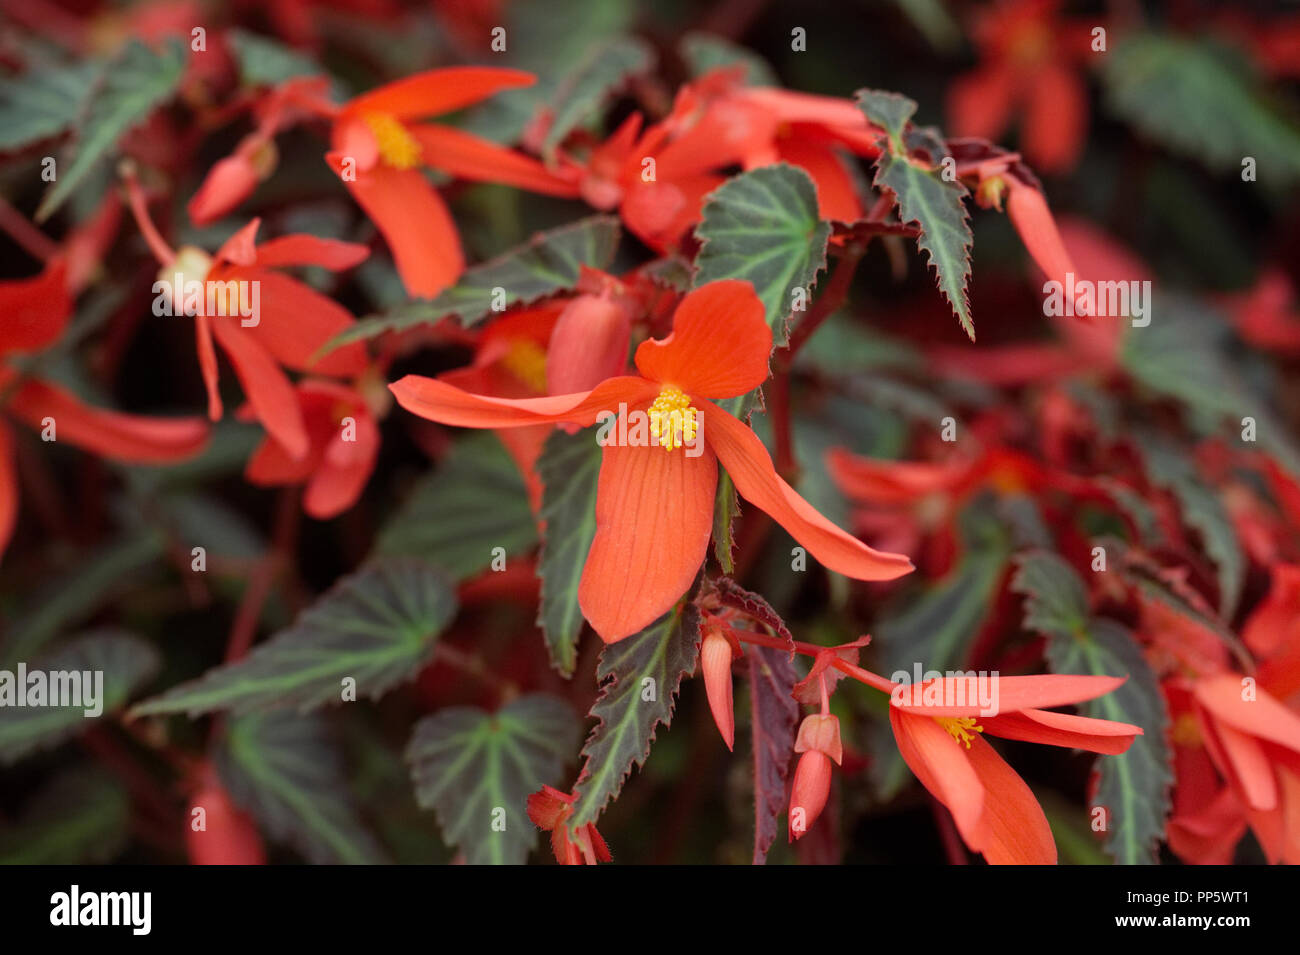 Red Begonia flowers. Stock Photo